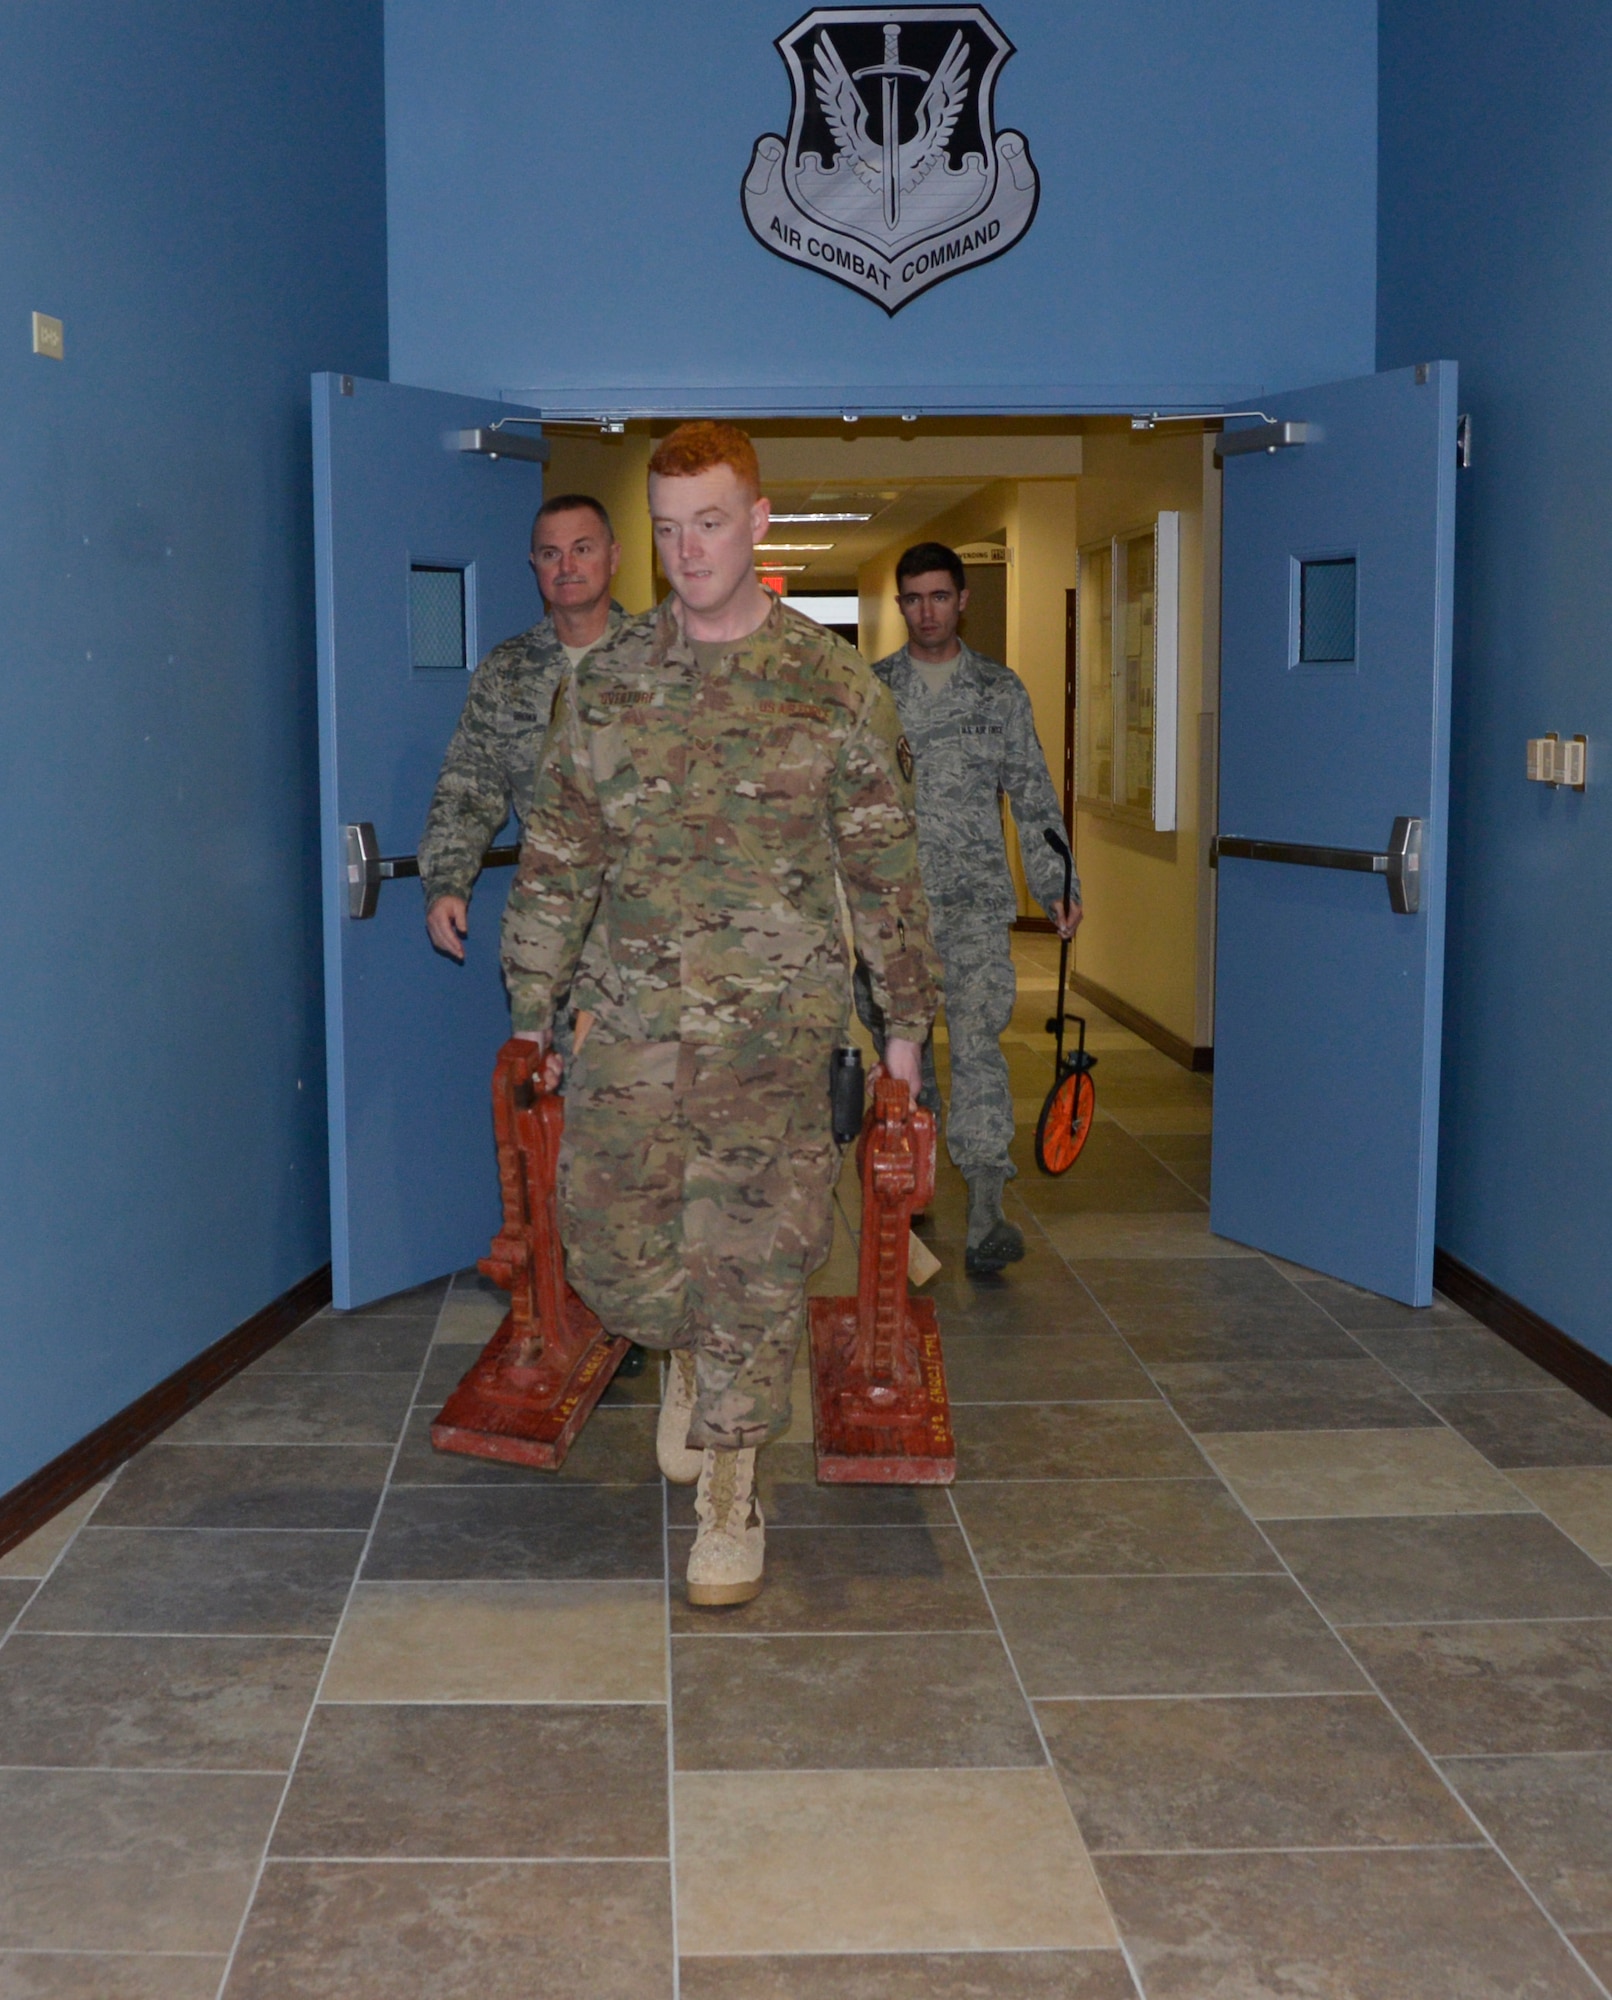 (L-R) Master Sgt. Keith Brown, Staff Sgt. Jeremy Overturf, and Staff Sgt. Anthony Martin, all from the 241st Engineering Installation Squadron, Chattanooga, Tenn., carry communications cable equipment into the 1st Air Force (Air Forces Northern) Headquarters building. They are part of a group of seven Airmen from the 241st EIS who deployed here to assist the 1st AF (AFNORTH) enterprise to restore its communications and computer capabilities following the devastating effects of Hurricane Michael Oct. 10, 2018. (Air Force photo by Mary McHale)